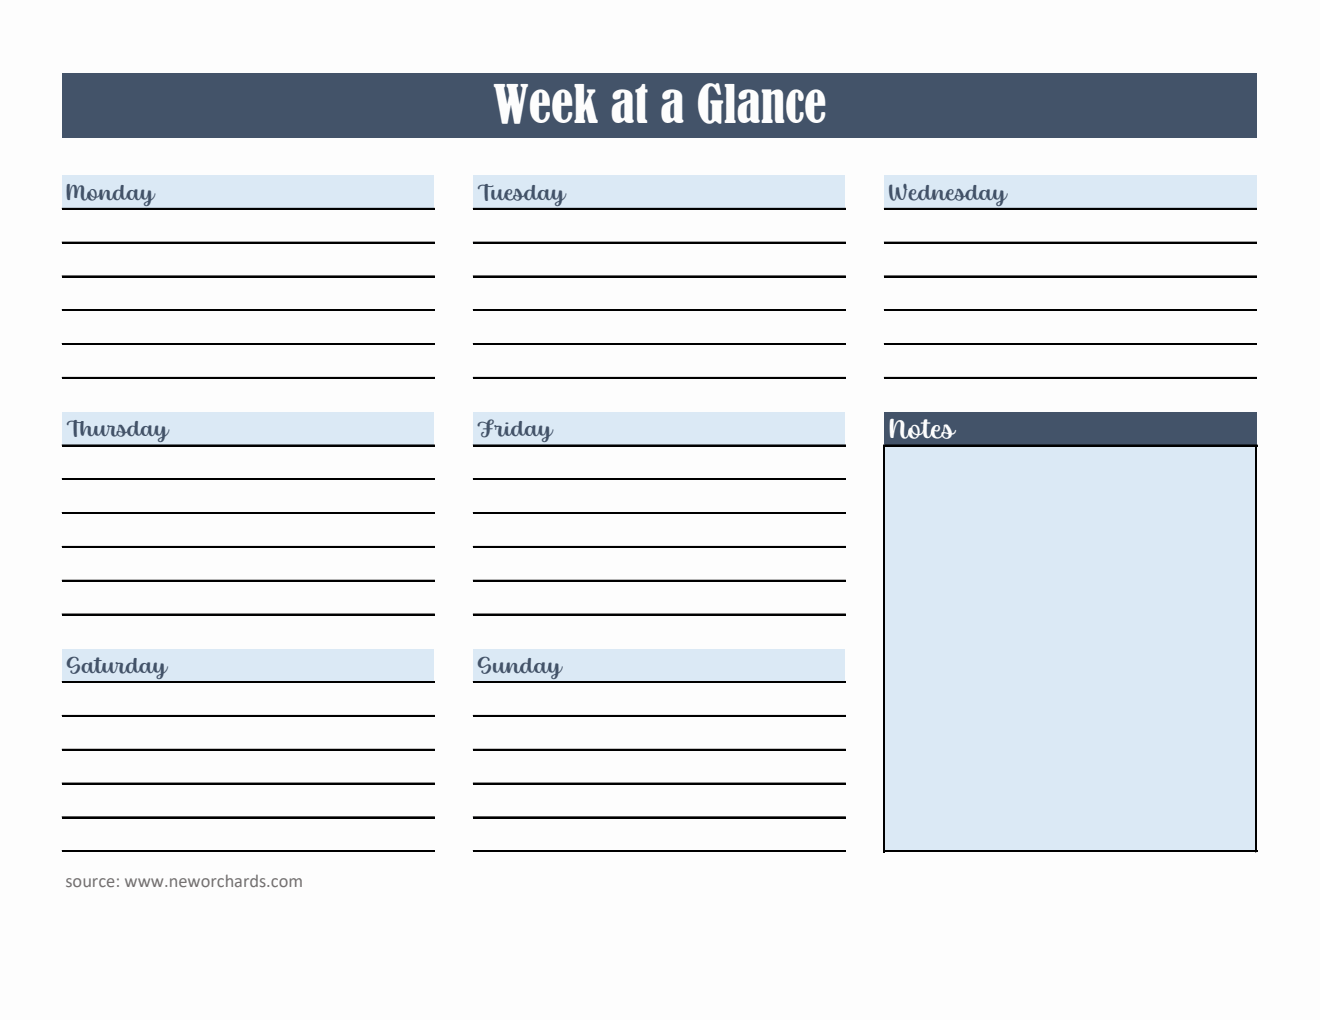 Editable Week at a Glance Template (Excel)